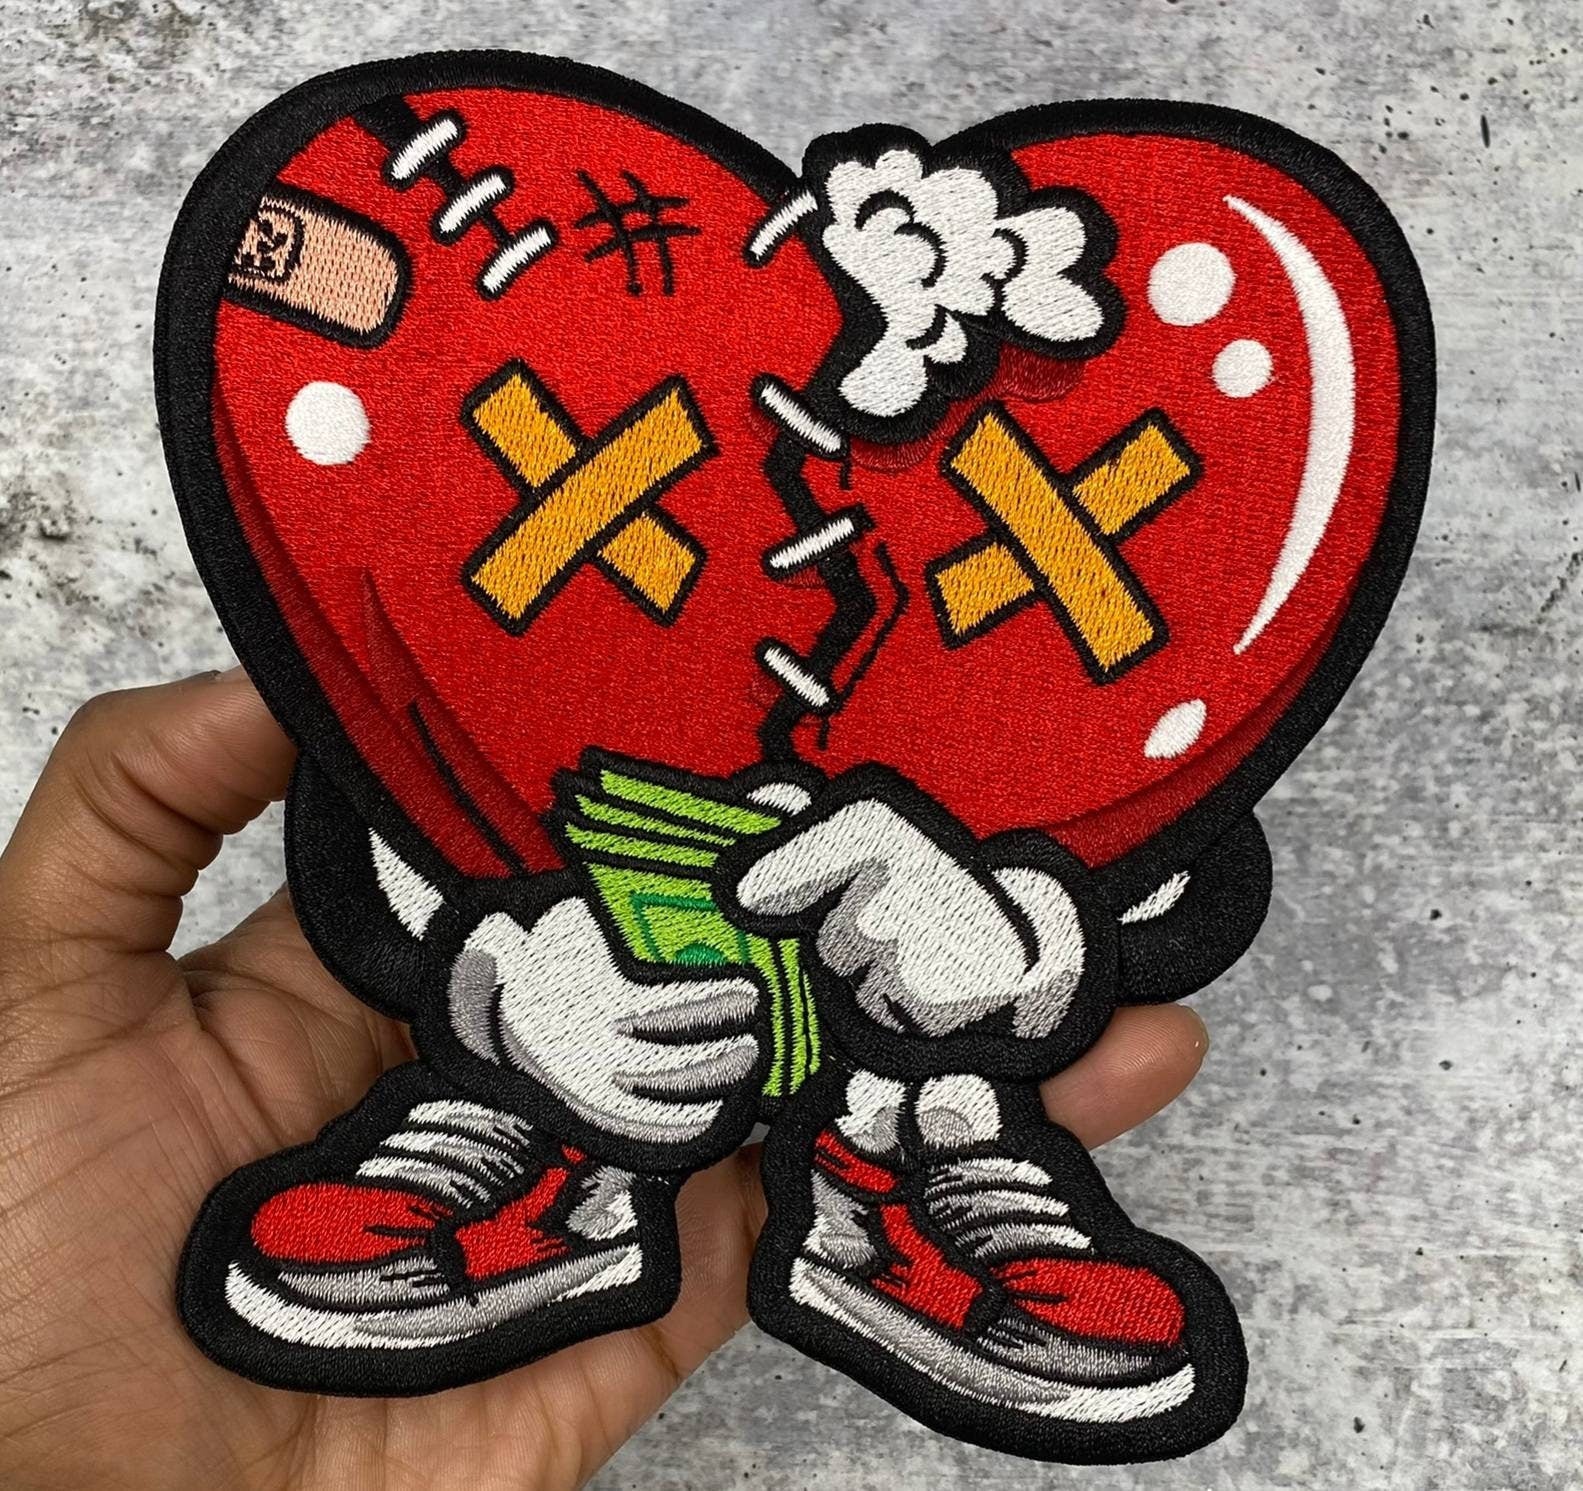 2x Love Heart Iron on Patches Red Love Heart Iron on Patch Iron on Love Heart  Patches Patches for Jackets Iron on Patches 